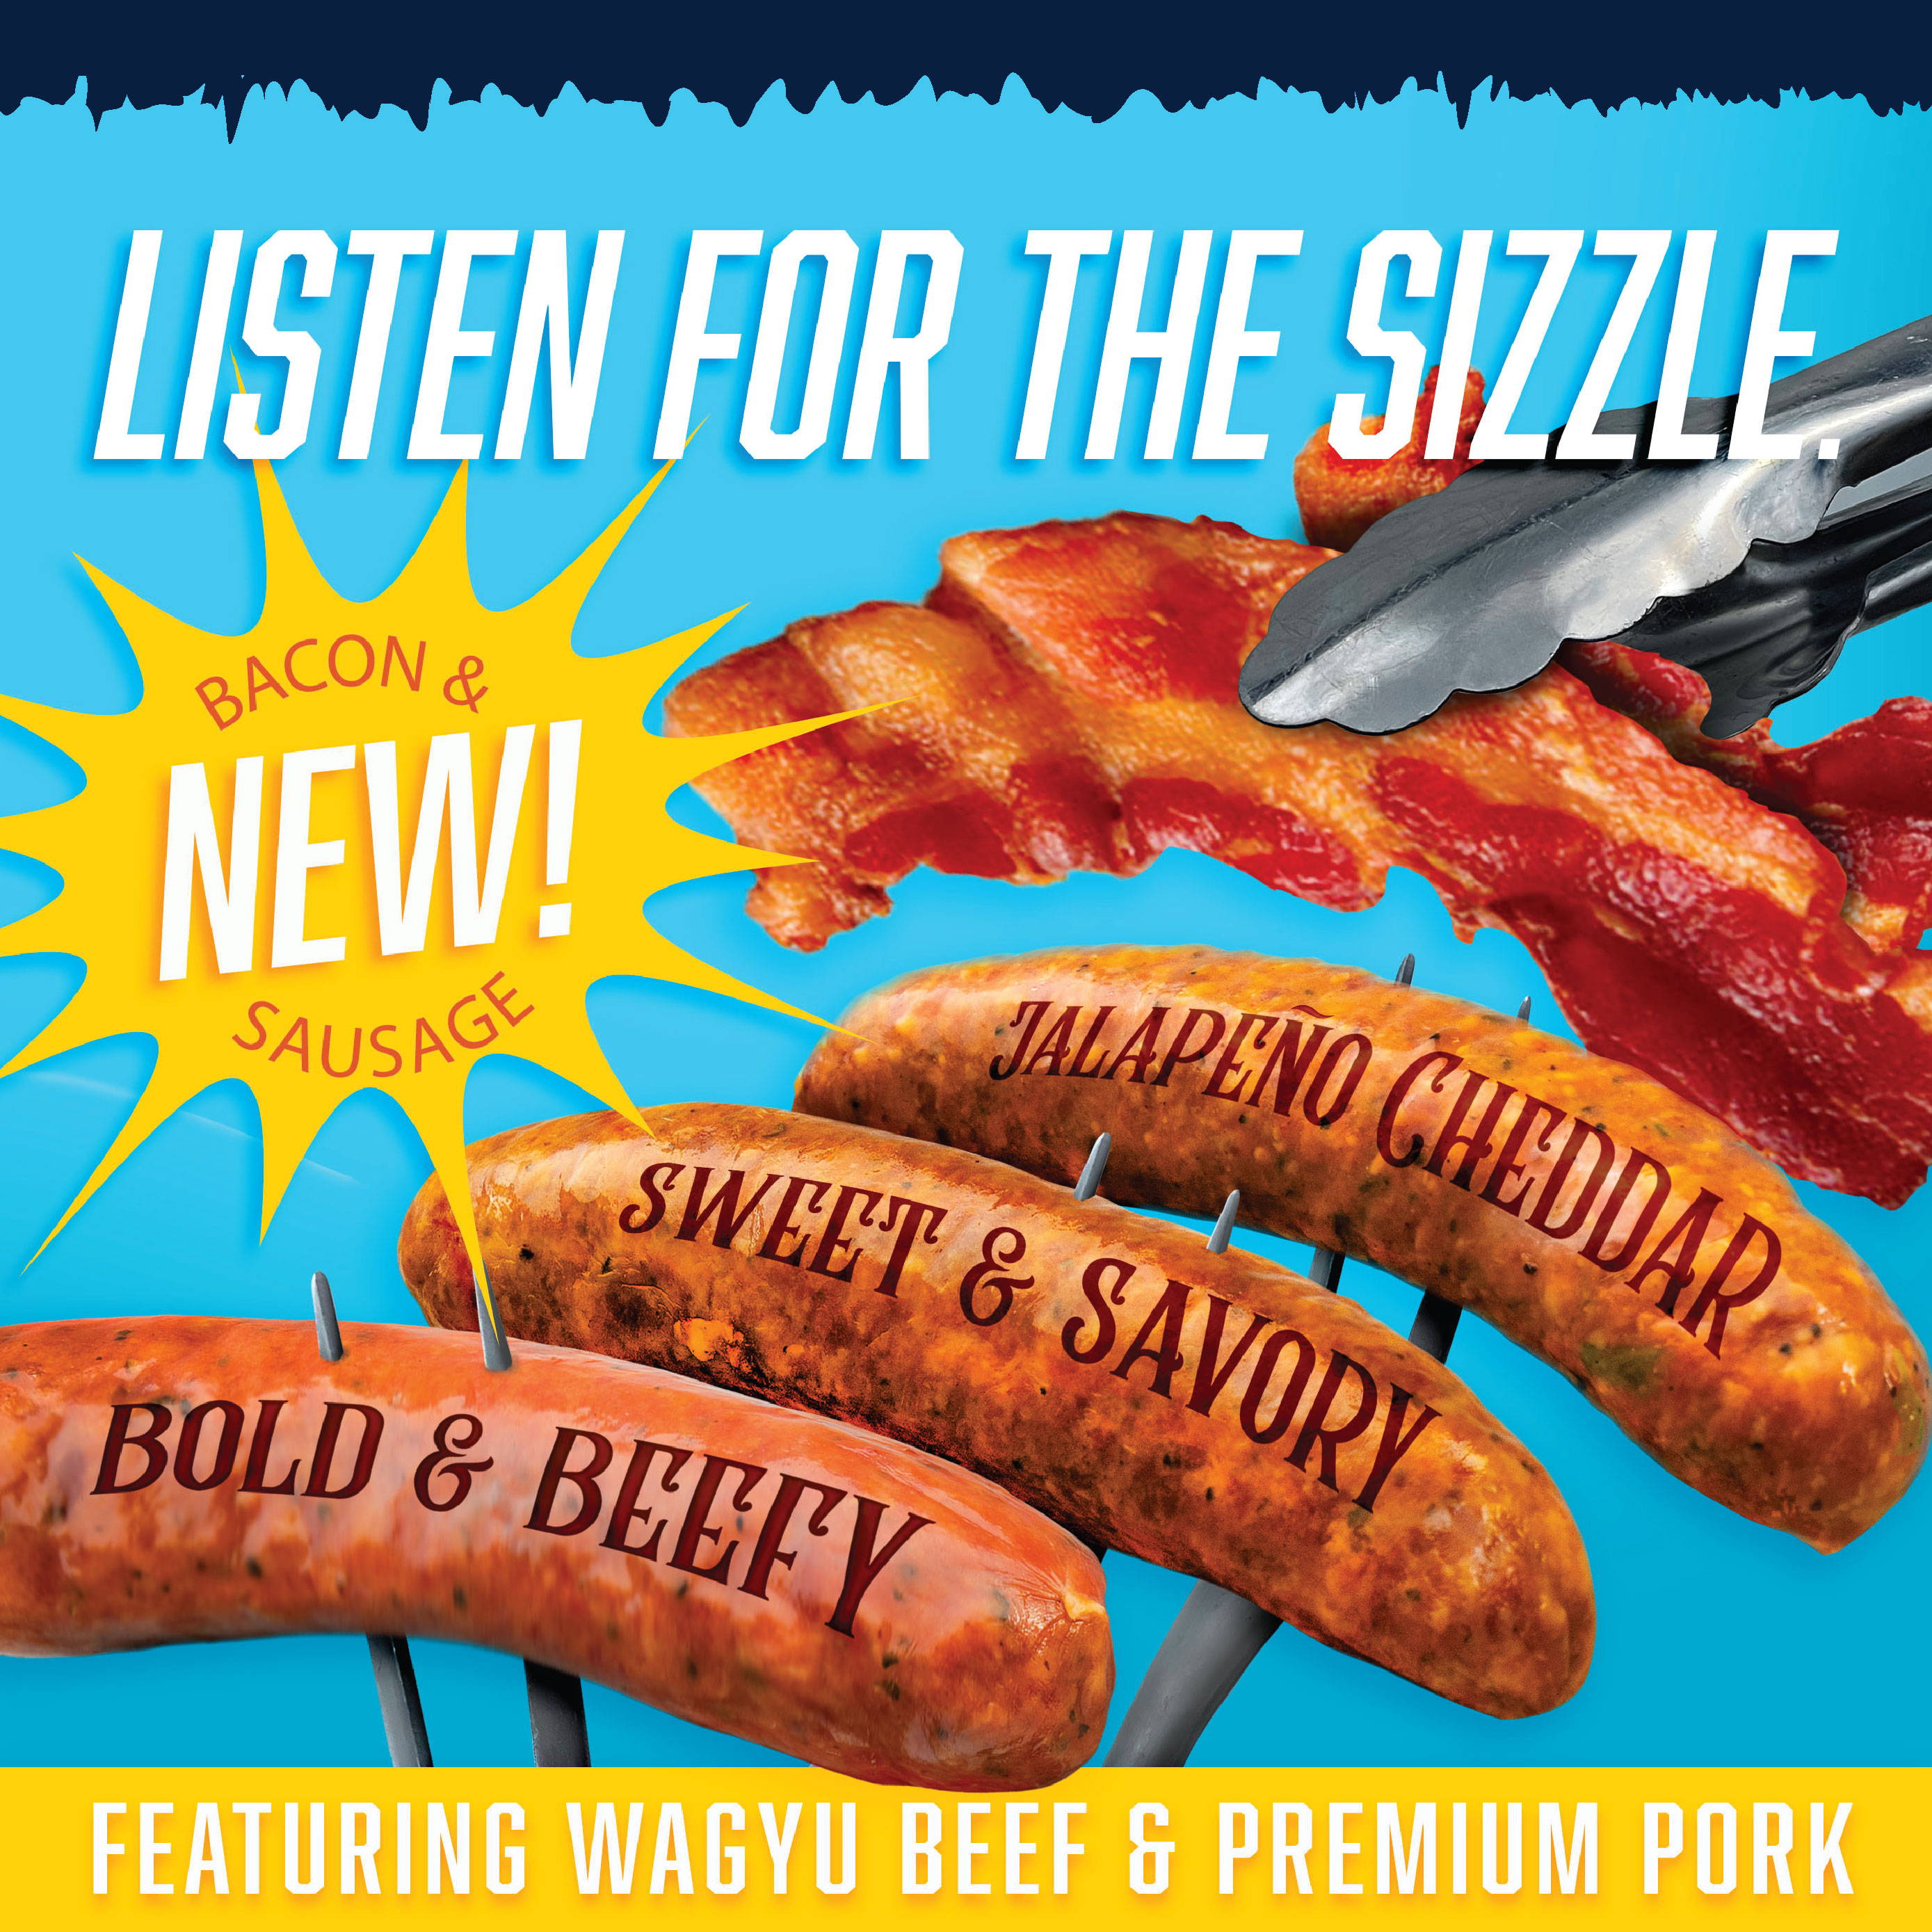 new bacon and sausage ad